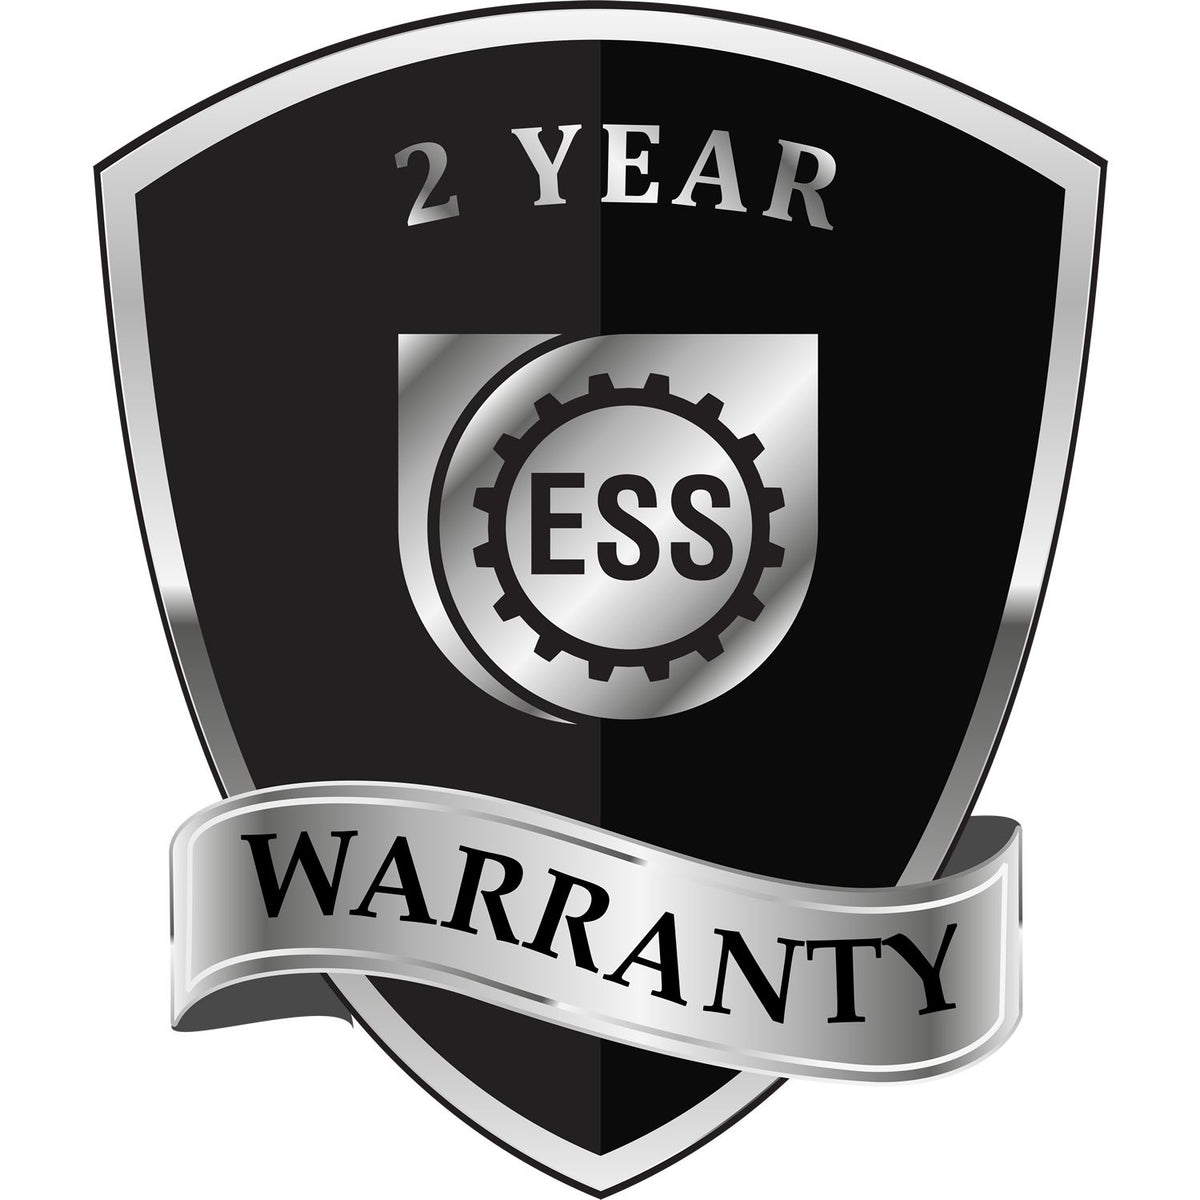 A black and silver badge or emblem showing warranty information for the Soft Nevada Professional Geologist Seal